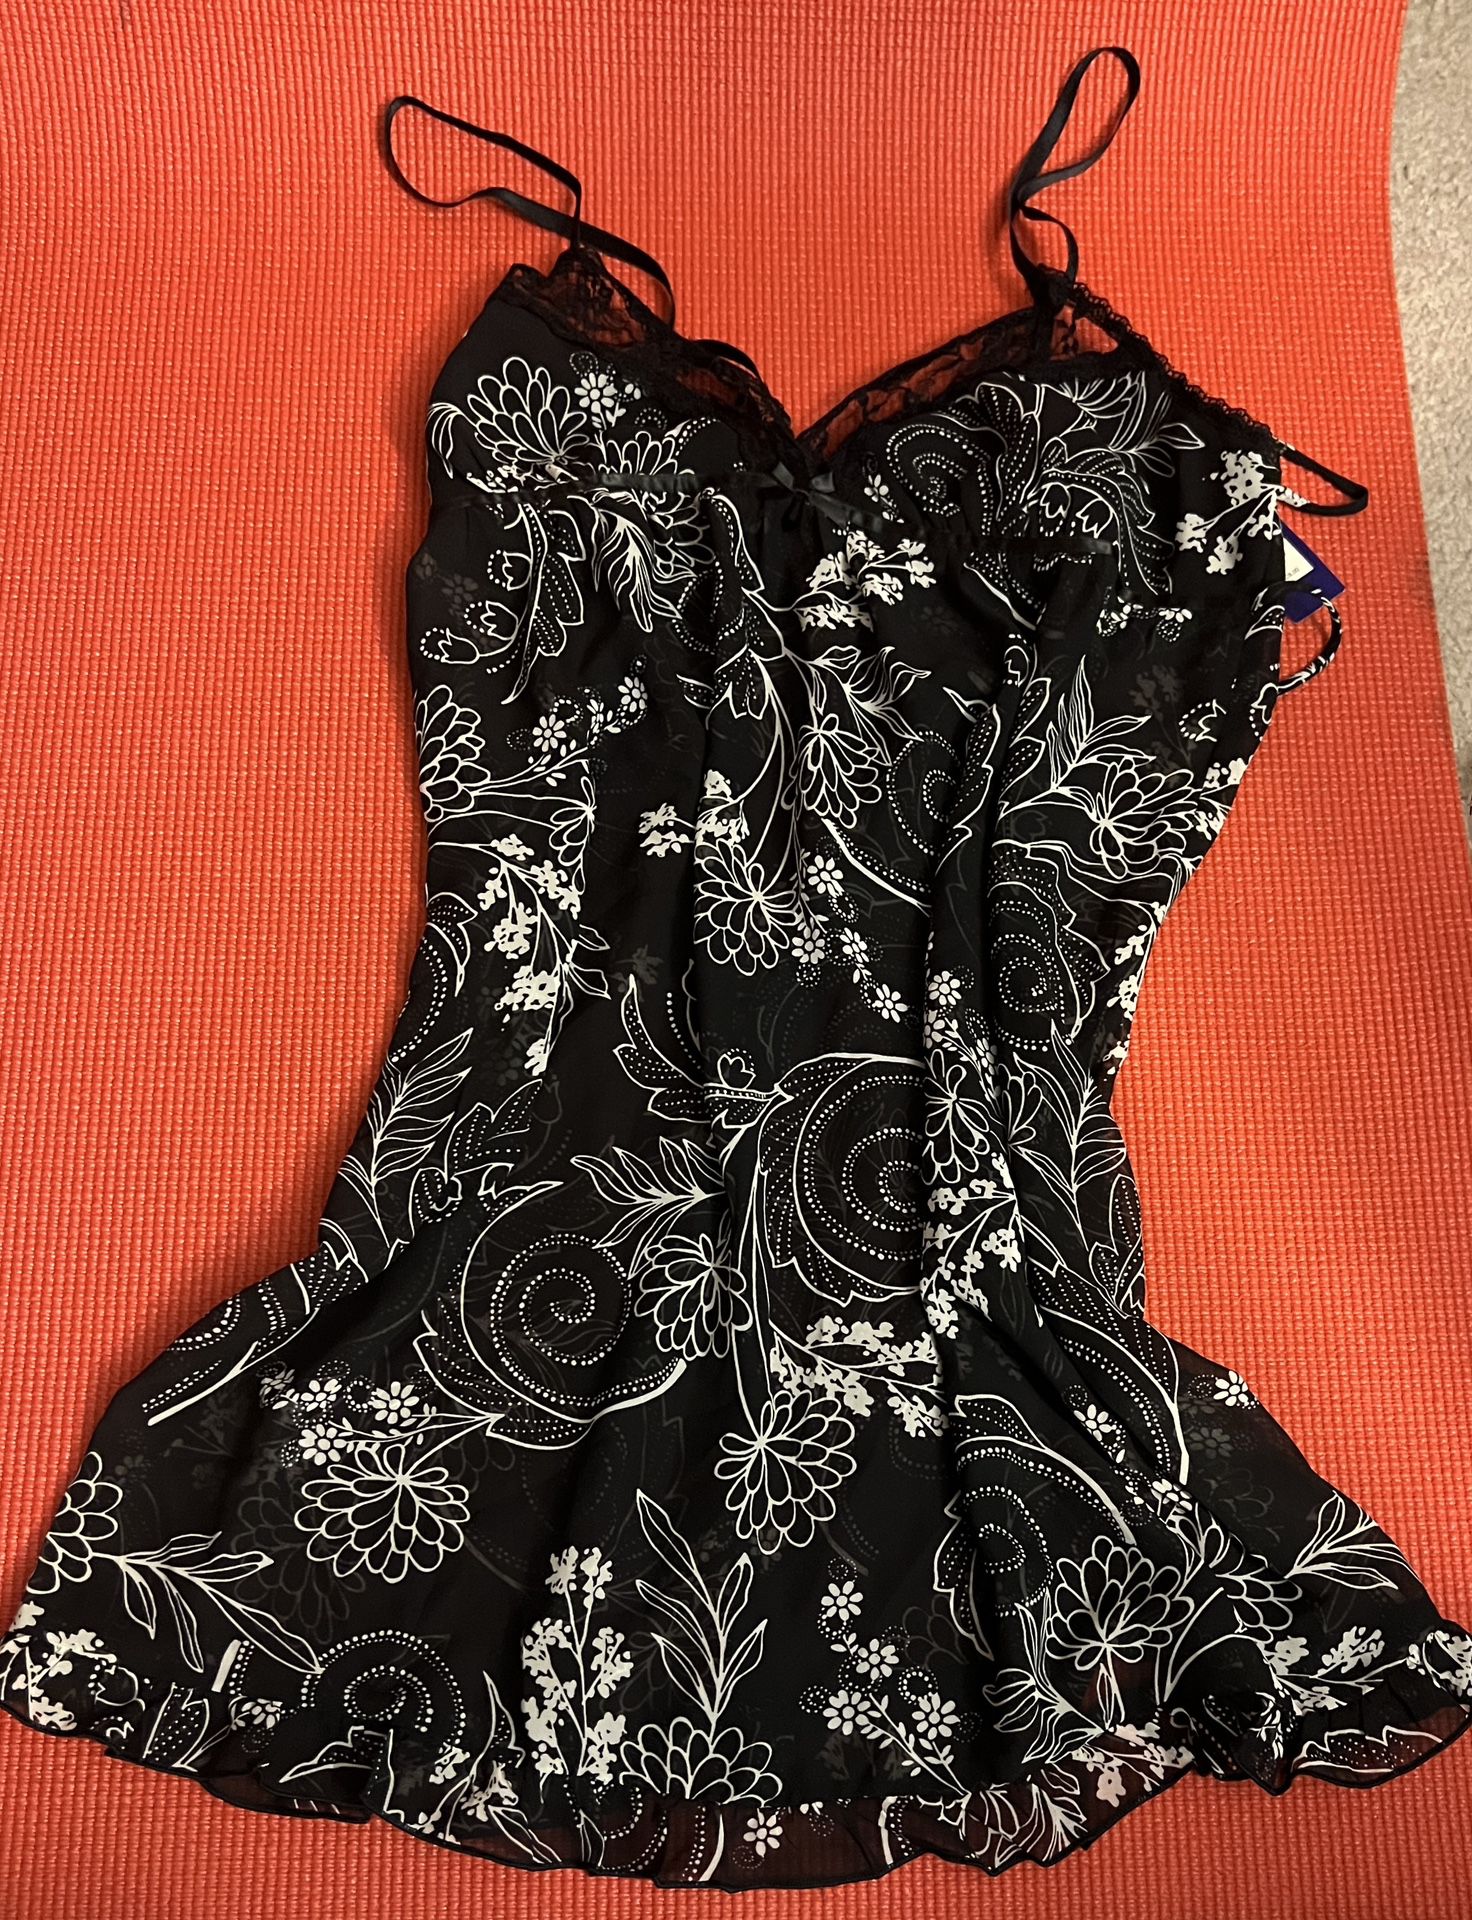 NWT Apt 9 Intimates Black Floral Swirl Sheer Nightgown Women’s Size Small